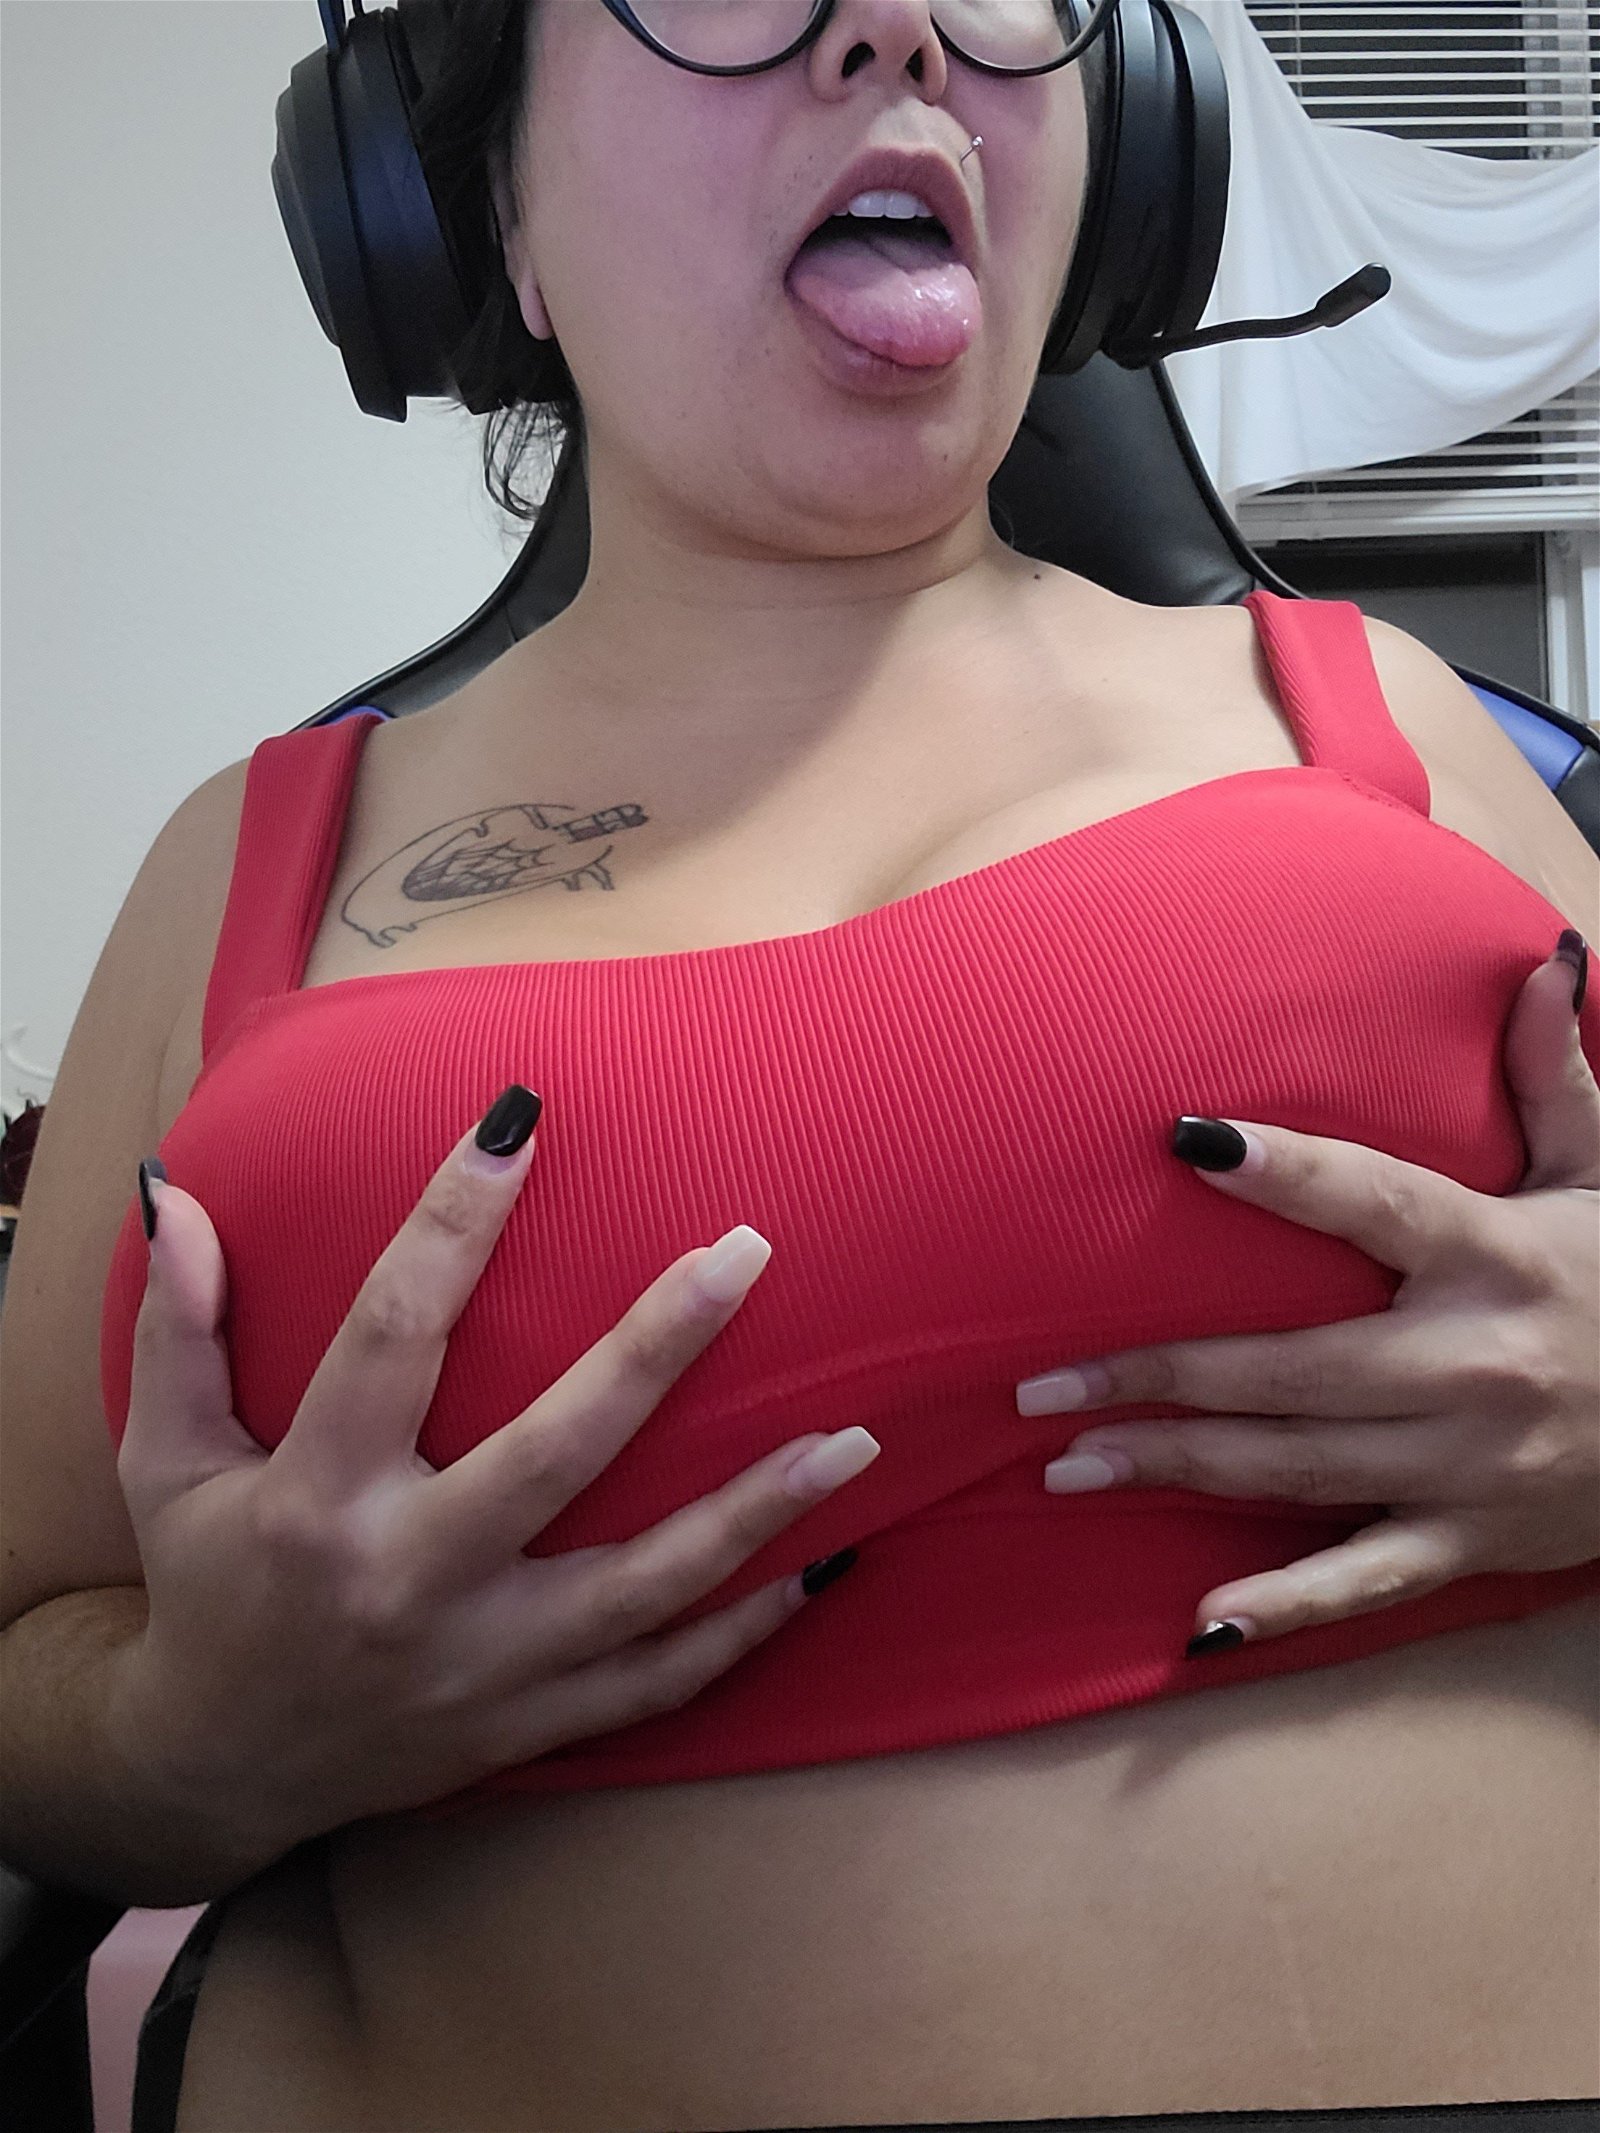 Photo by NyxTresa with the username @NyxTresa, who is a star user,  December 19, 2023 at 3:21 AM. The post is about the topic Tit Worship and the text says 'Playing games after a long day. 

Been teasing myself a little on and off all day...

#NyxTresa #AltModel #Tits #BigTits #TitWorship'